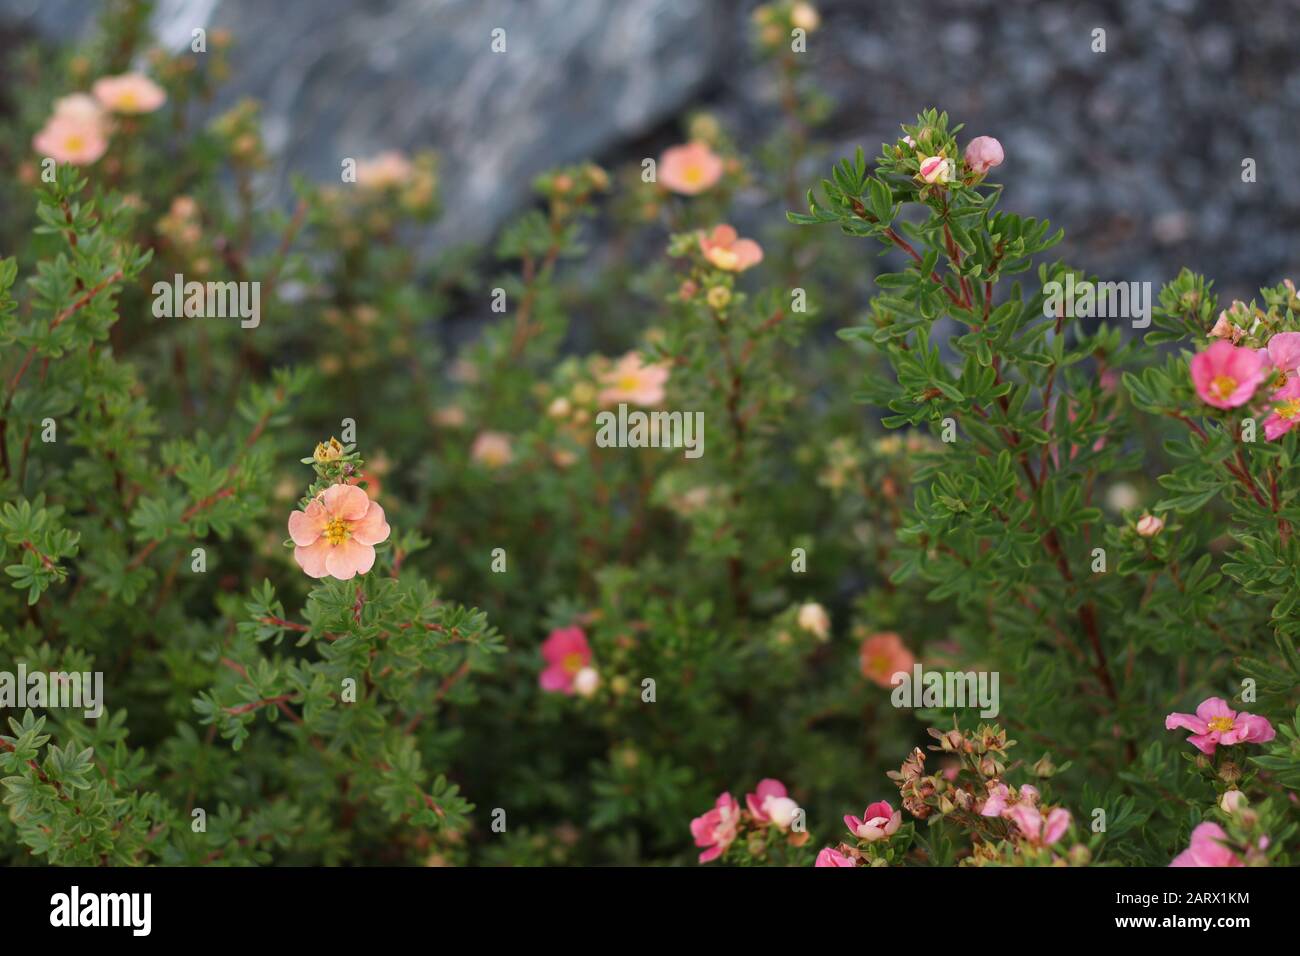 Pink lapchatki flowers on a stone background in the summer garden. Day photography Stock Photo